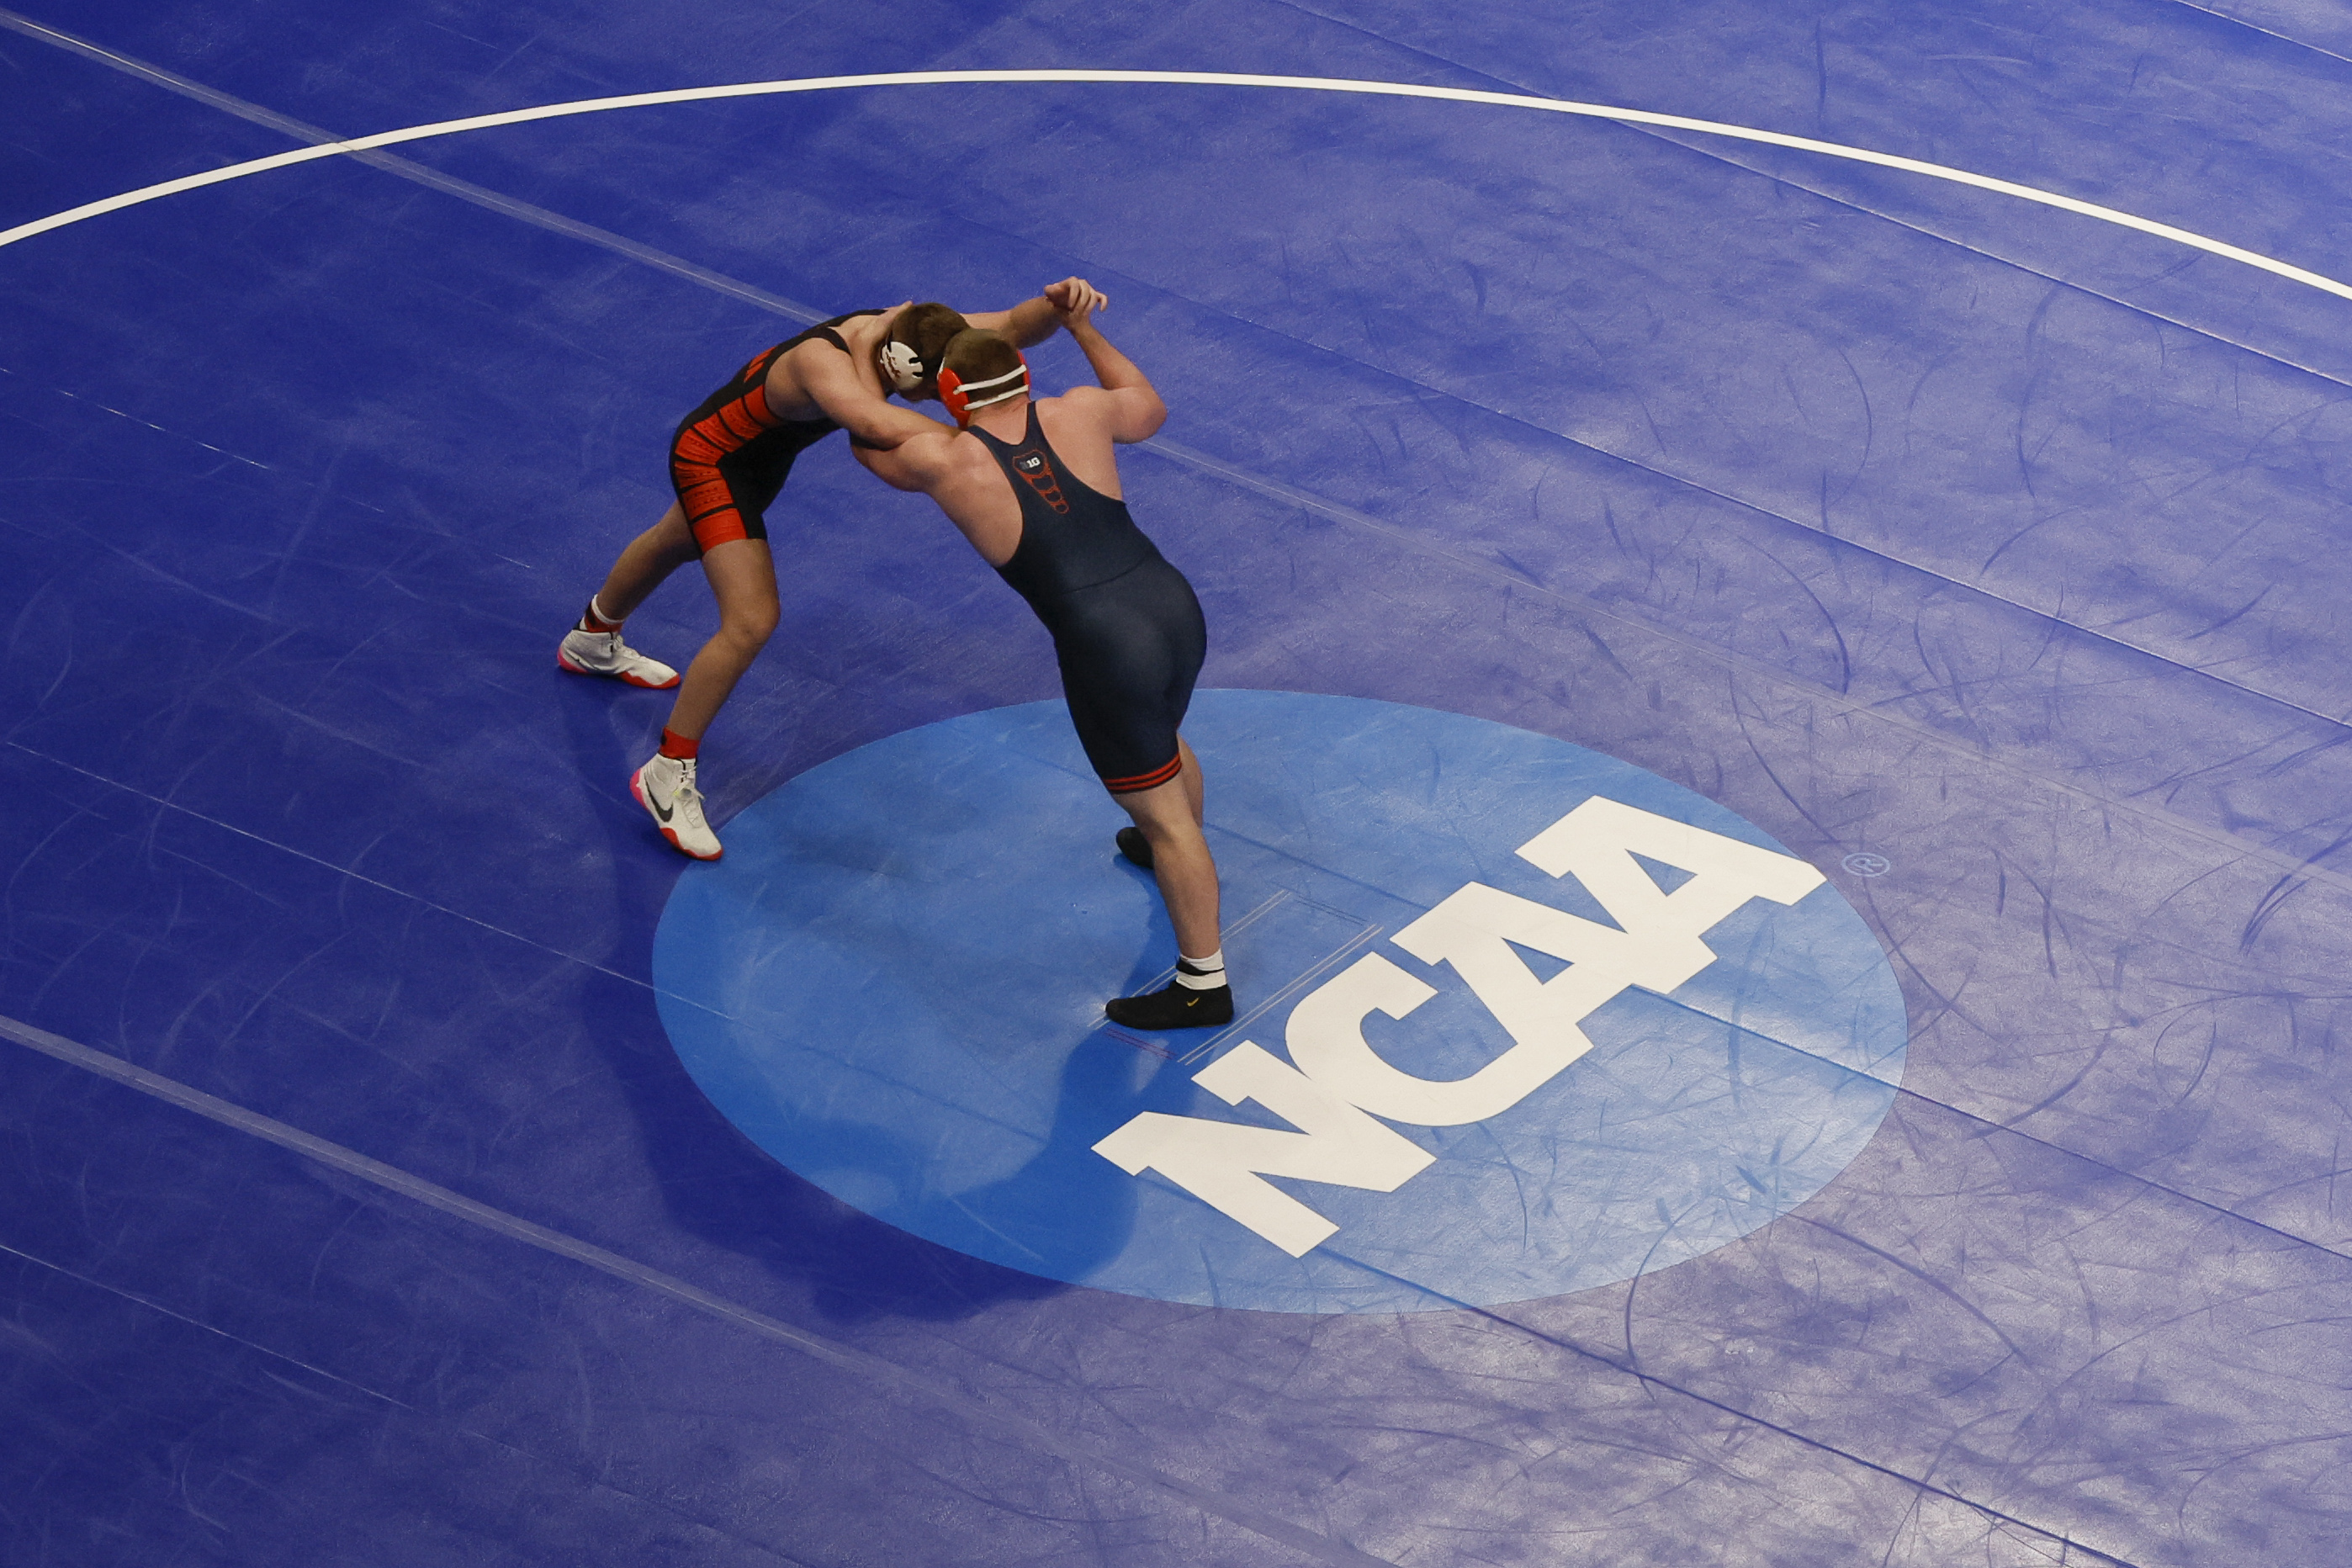 NCAA Wrestling Finals Live stream, TV schedule, how to watch 2022 Championships